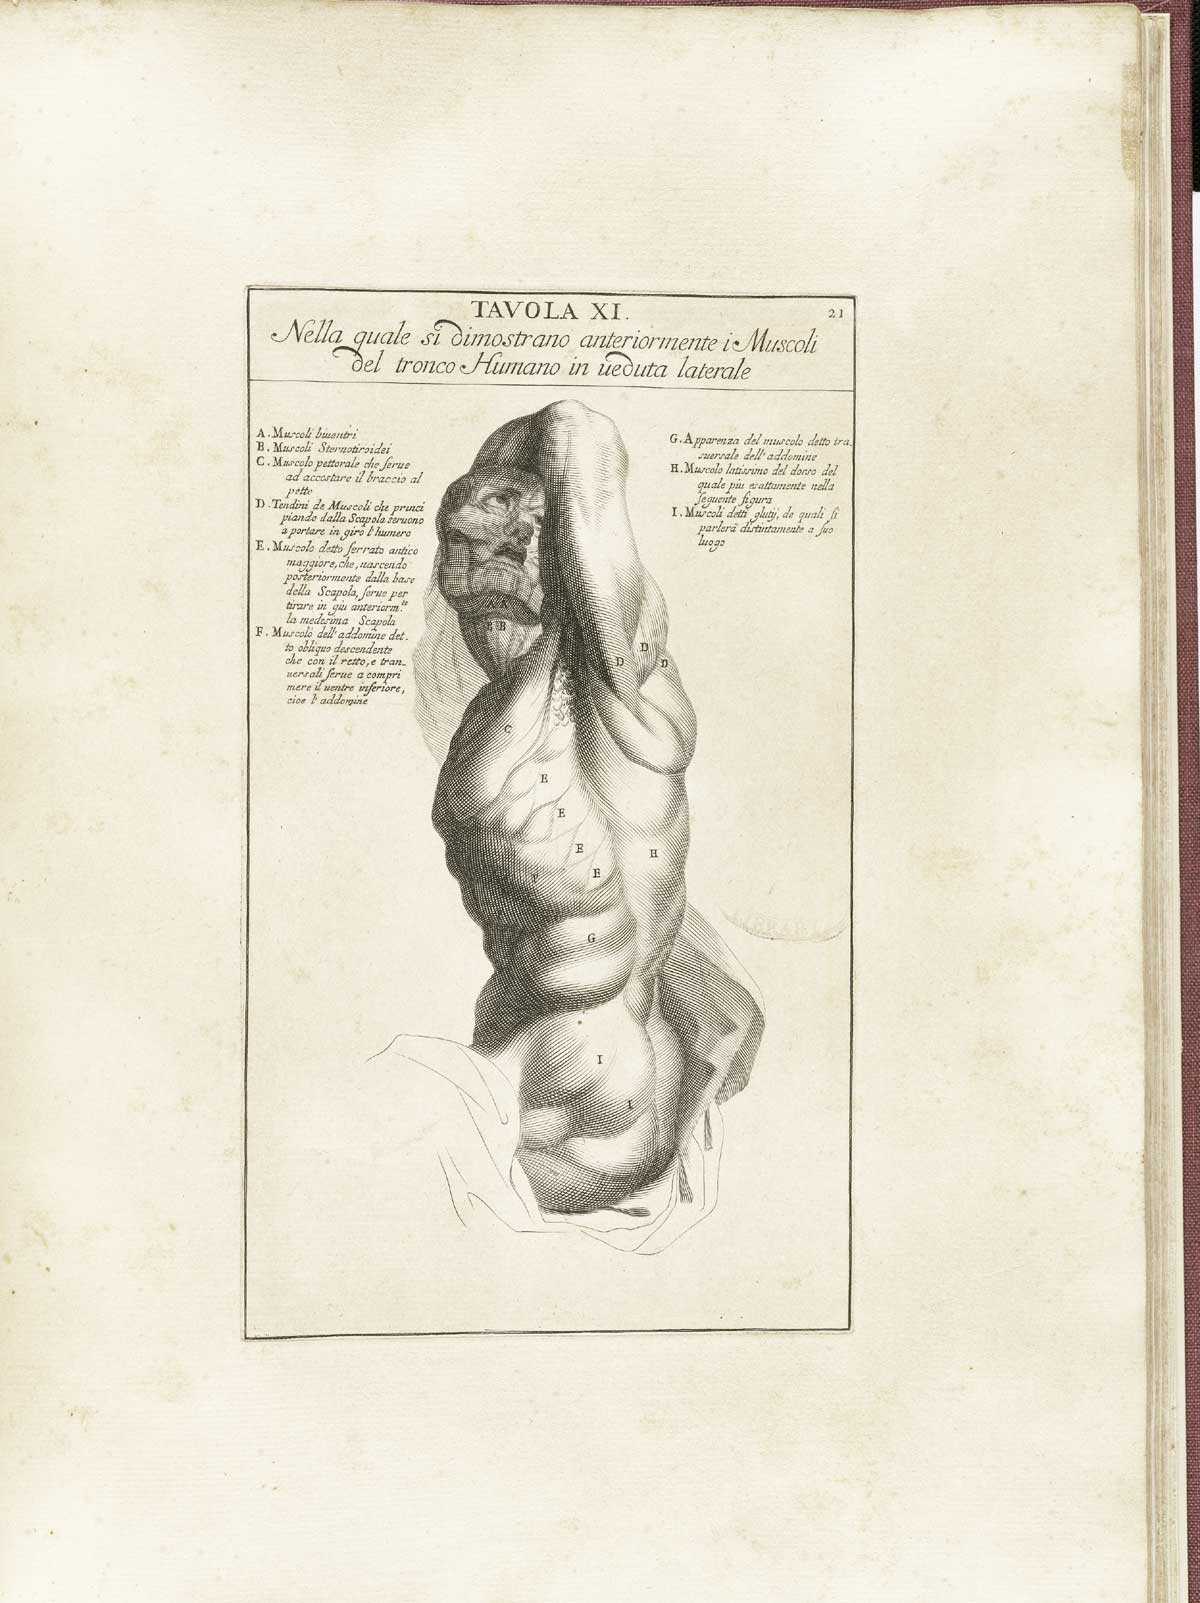 Engraving of a muscle figure from the waist up viewed from the side looking at the viewer, with flesh removed to show detail of the muscles of the head, neck, chest, and abdomen; from Bernardino Genga’s Anatomia per uso et intelligenza del disegno, NLM Call no.: WZ 250 G329an 1691.